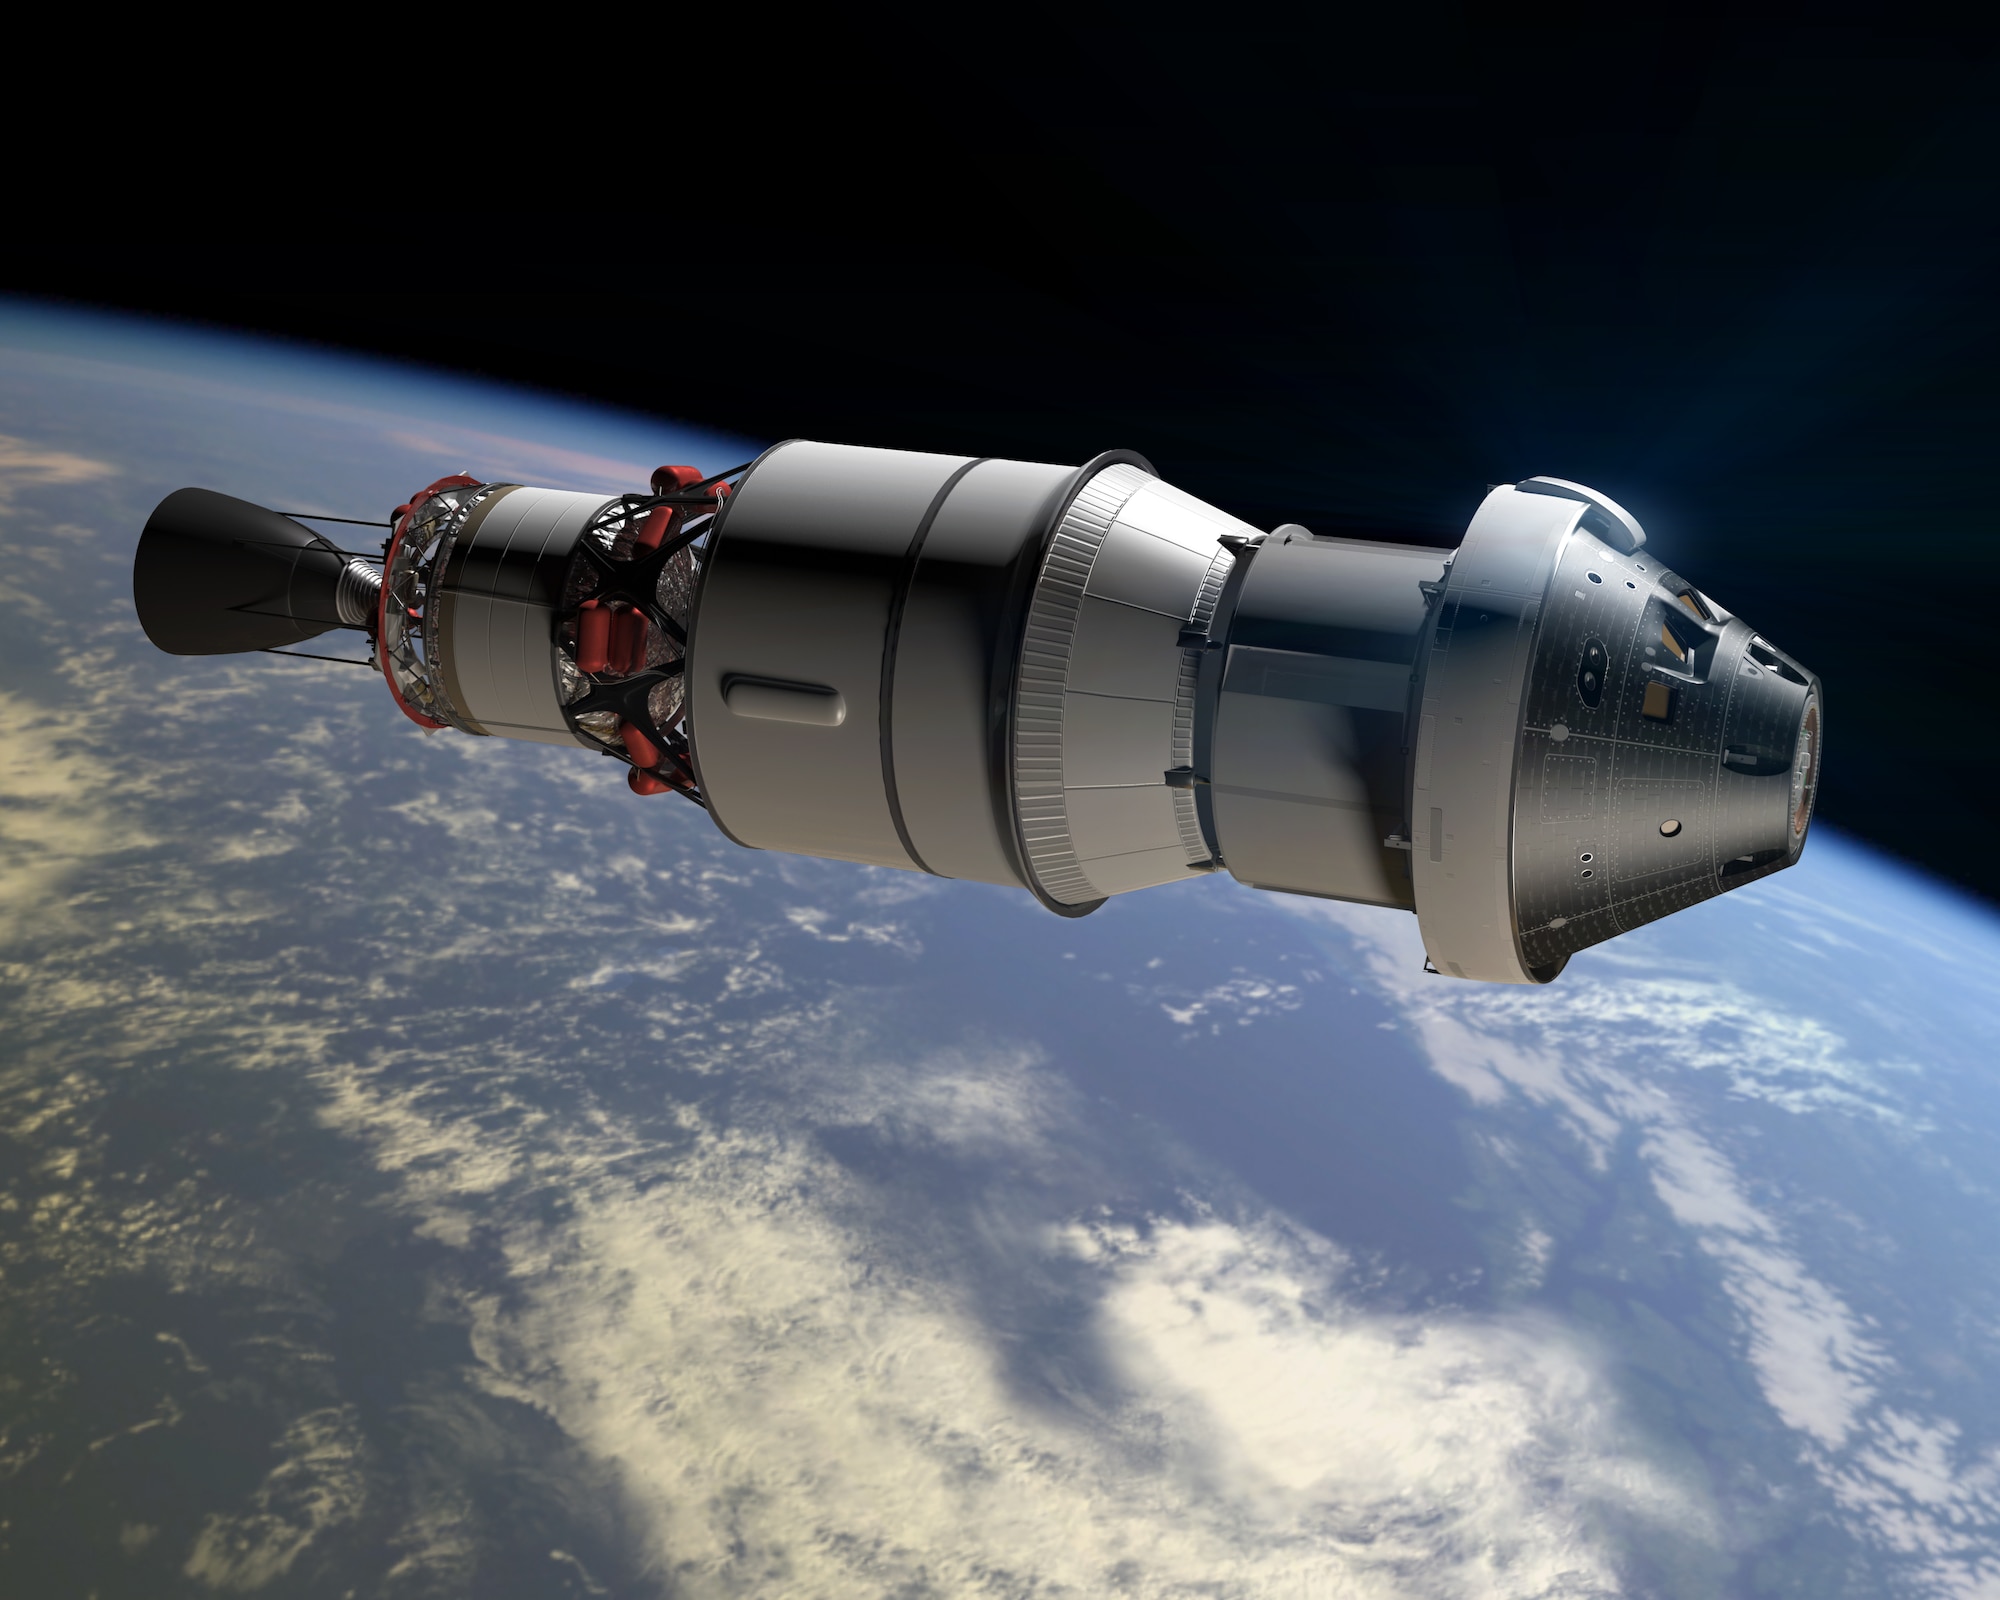 Artist’s rendering of Orion during Exploration Flight Test-1, the first spaceflight of America’s next generation spacecraft. A scale model of this configuration of the Orion underwent buffet/acoustic testing in AEDC’s 16-foot transonic wind tunnel in support of an upcoming flight test in 2014.  (Graphic courtesy of NASA)